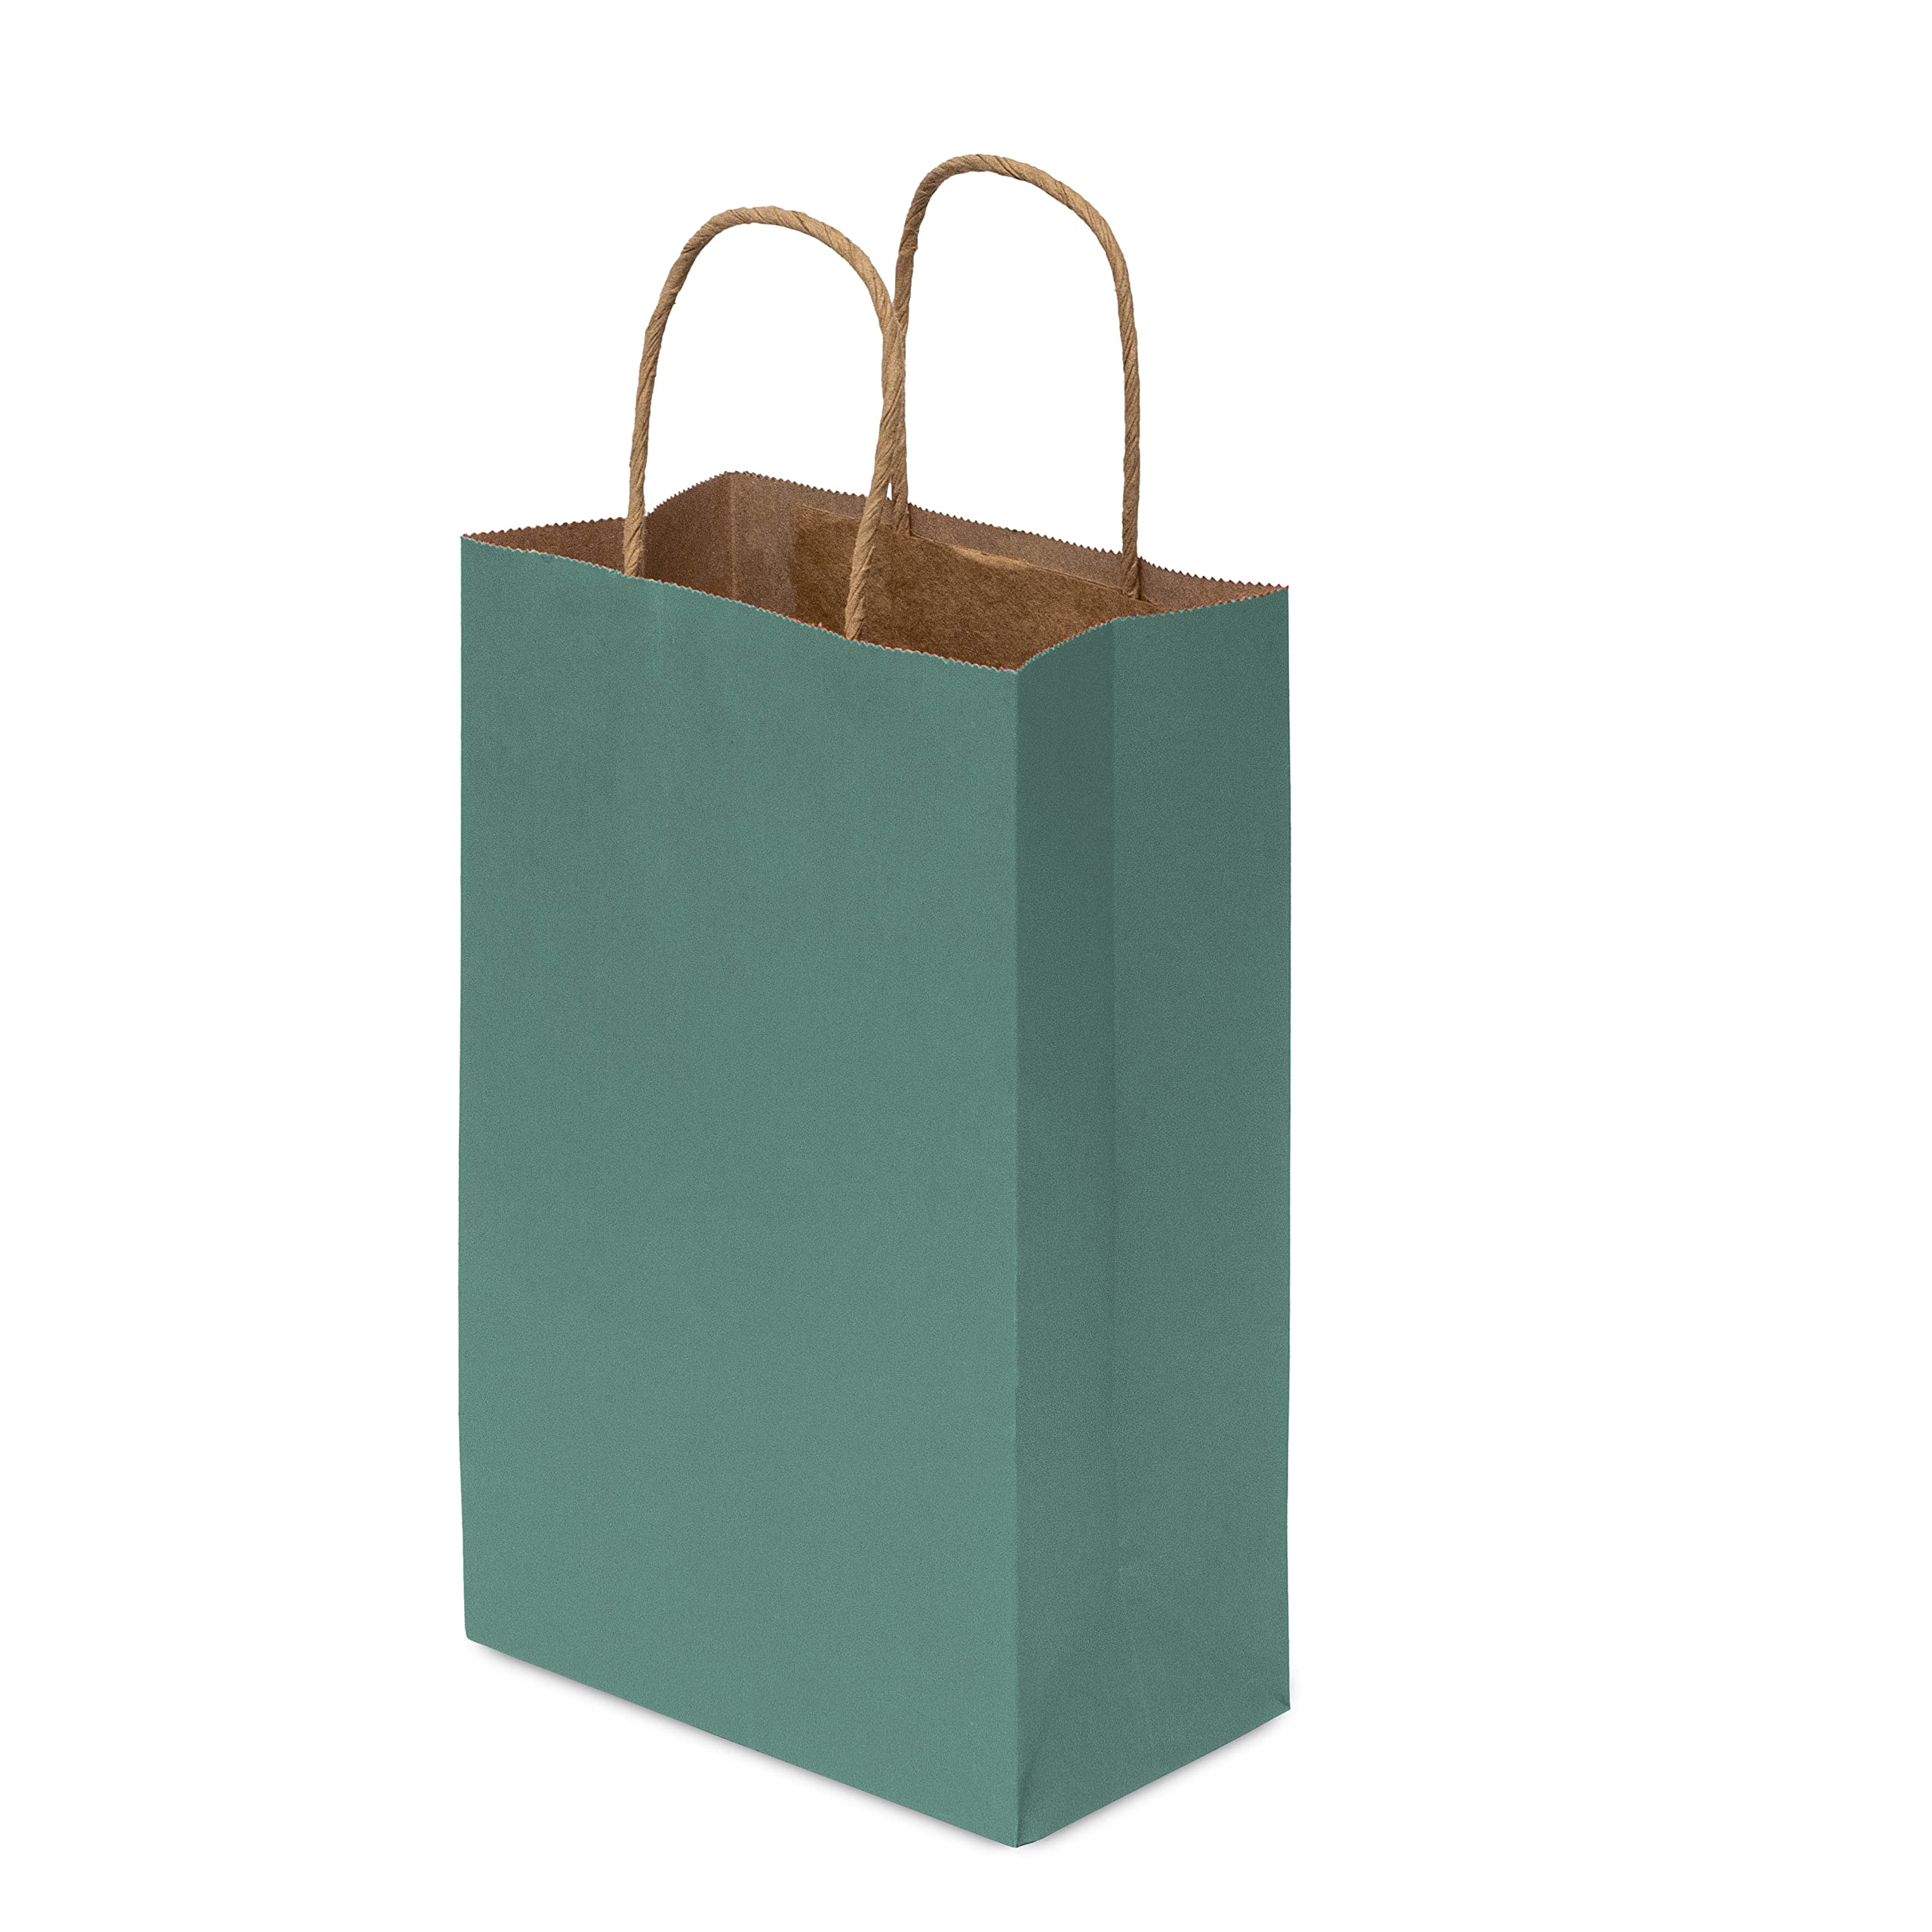 Green Gift Bags - 6x3x9 Inch 100 Pack Small Kraft Paper Shopping Bags with Handles, Craft Totes in Bulk for Boutiques, Small Business, Retail Stores, Birthday Parties, Jewelry, Merchandise, Bulk  - Like New